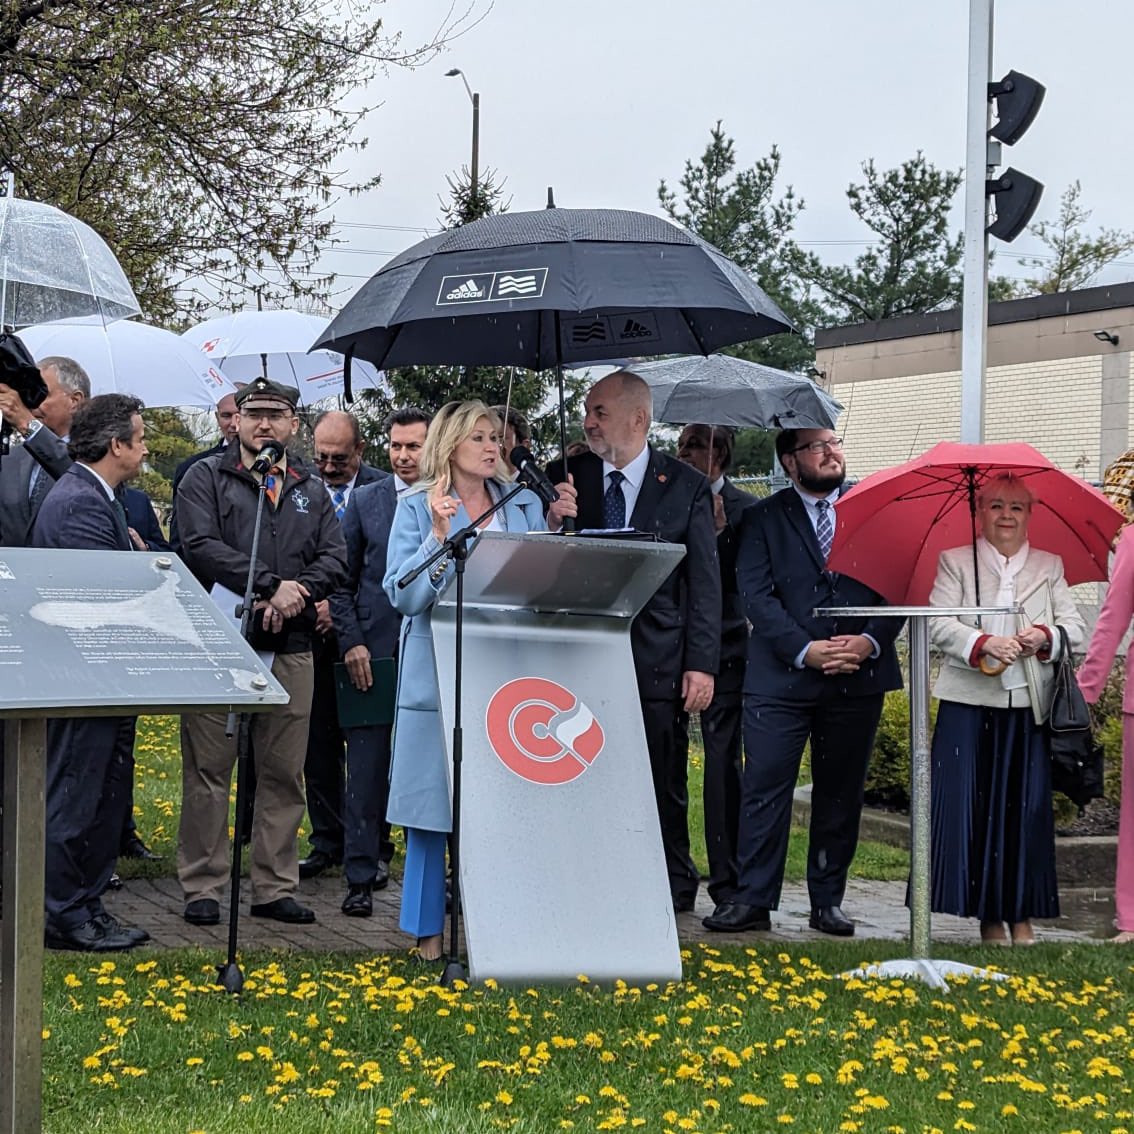 Poles are resilient, determined, hardworking, community-focused people, and I am incredibly proud of my Polish heritage. ​​Thank you to the @CanPolCongress for bringing us together to celebrate the 233rd anniversary of the Polish Constitution. #onpoli